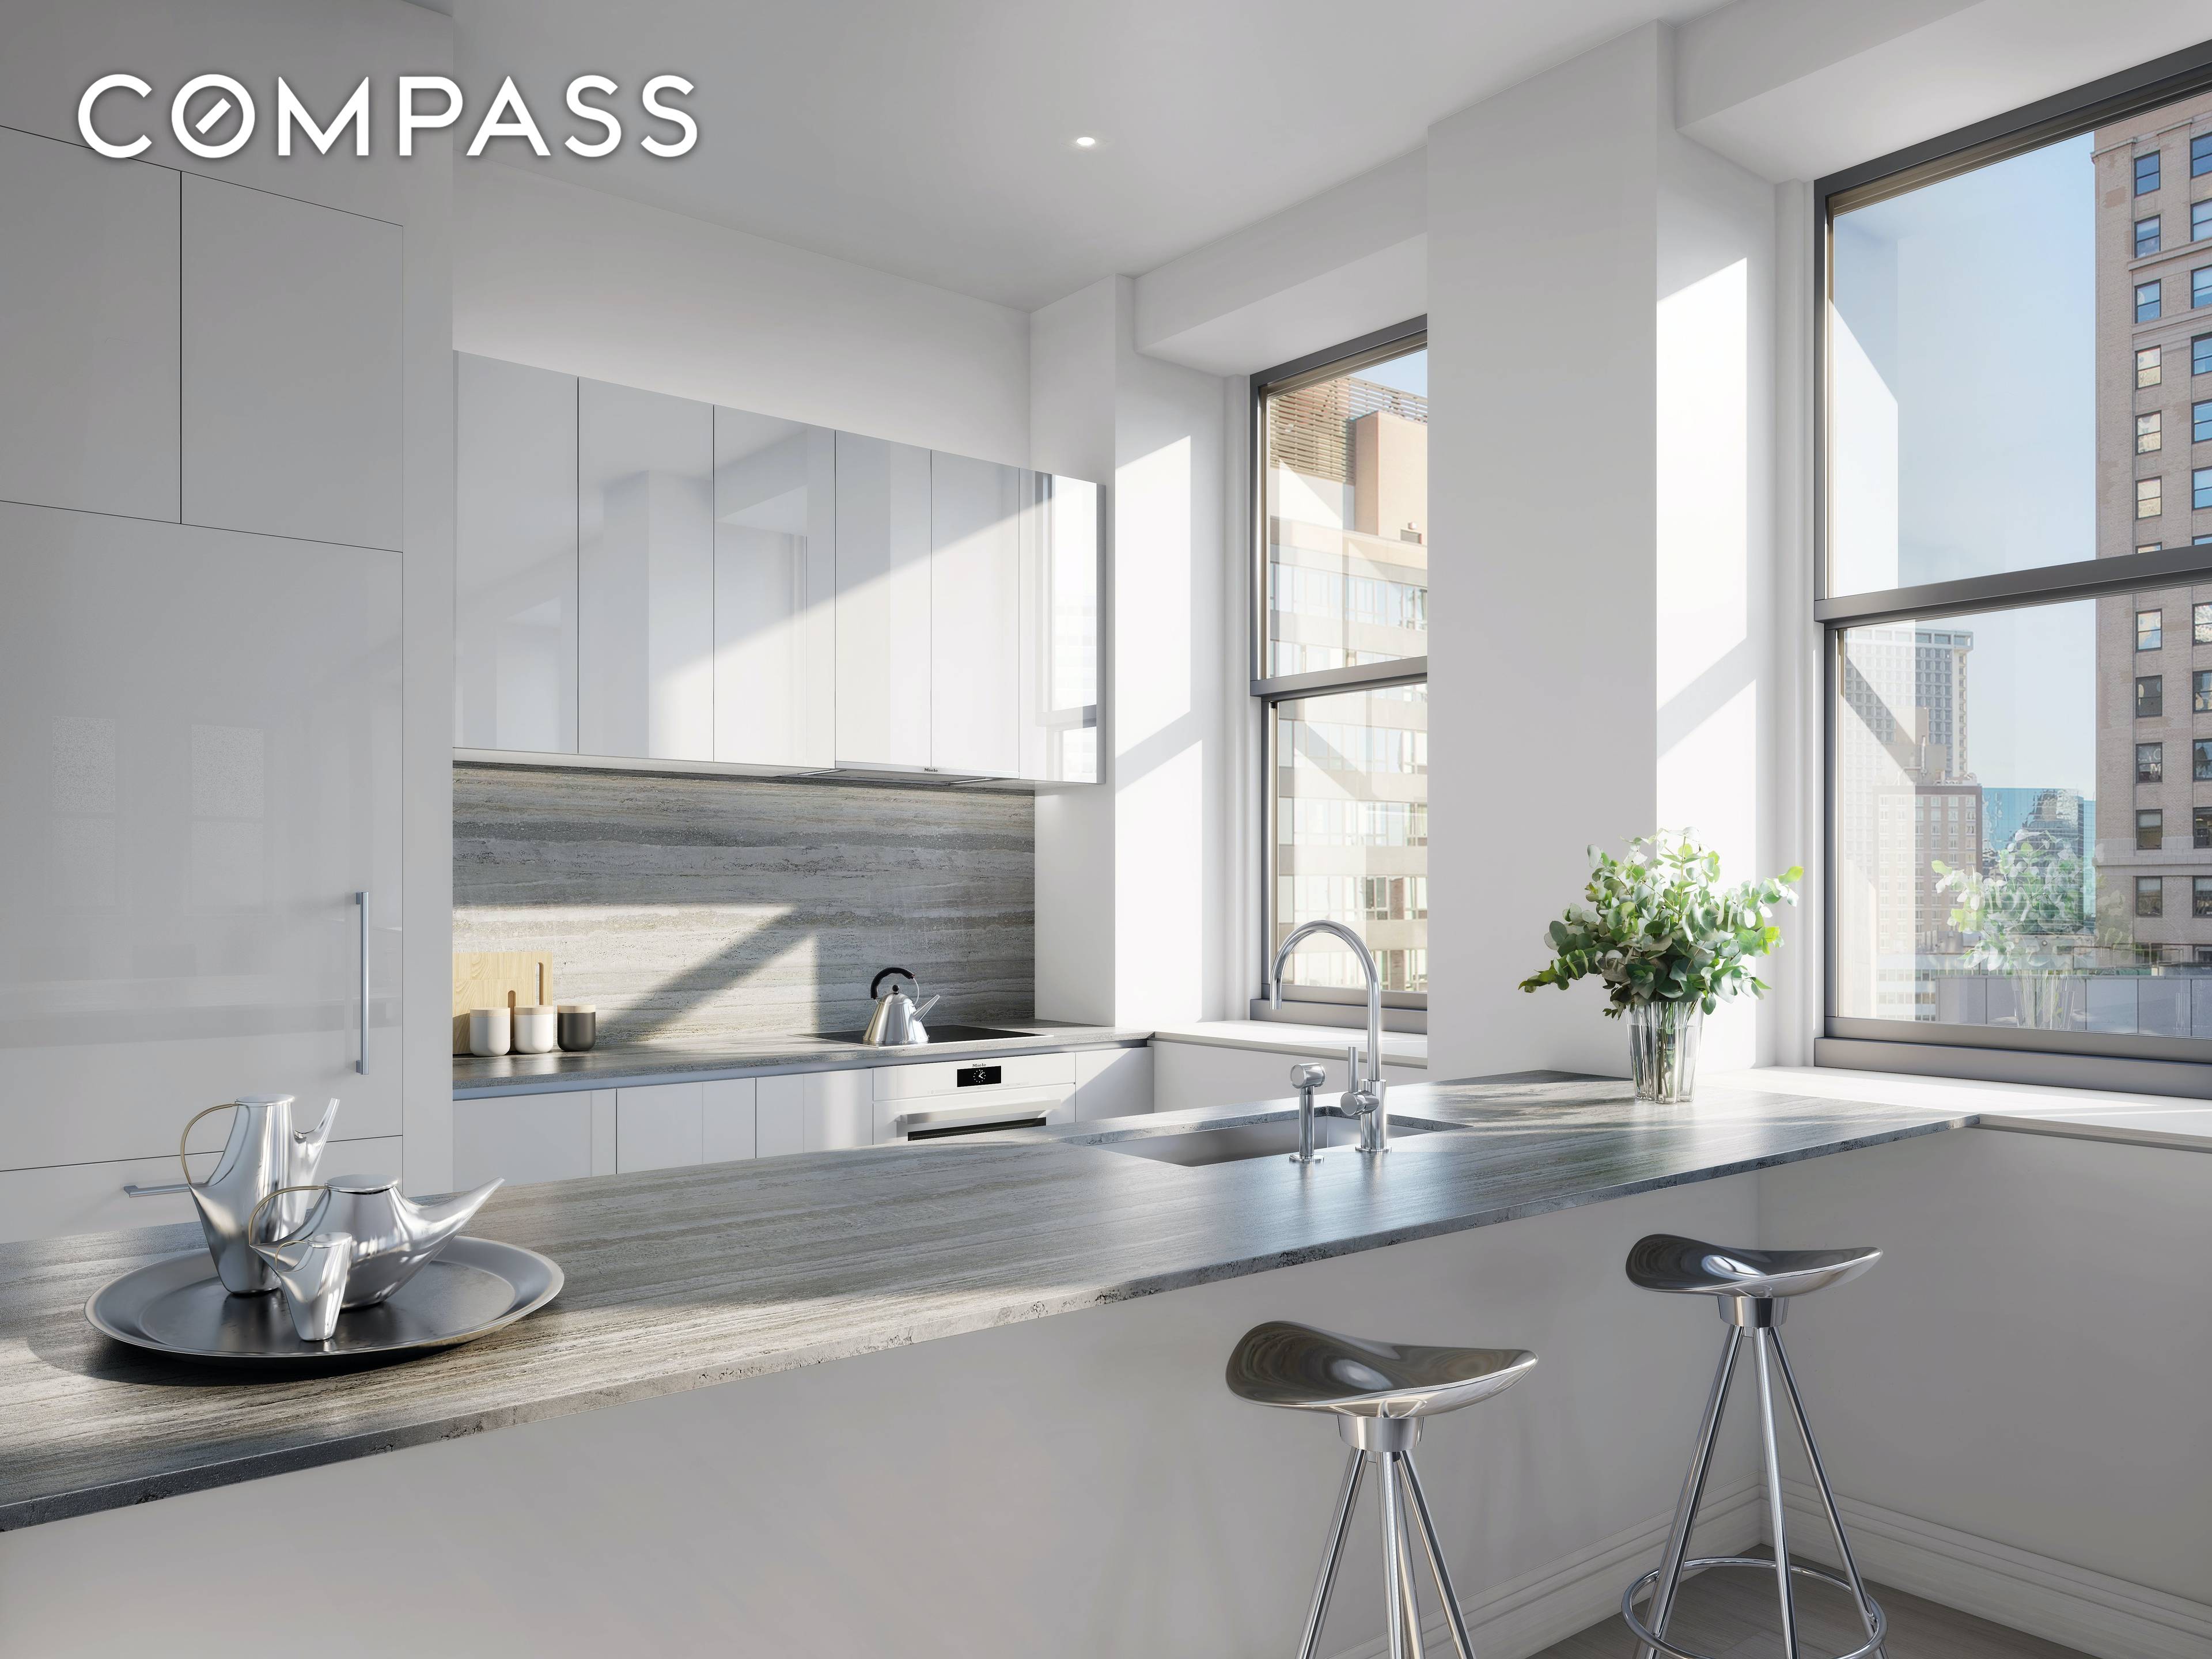 Residence 906 is a dramatically designed one bedroom home featuring an L shaped integrated kitchen and western views over Broadway and the historic American Express building.